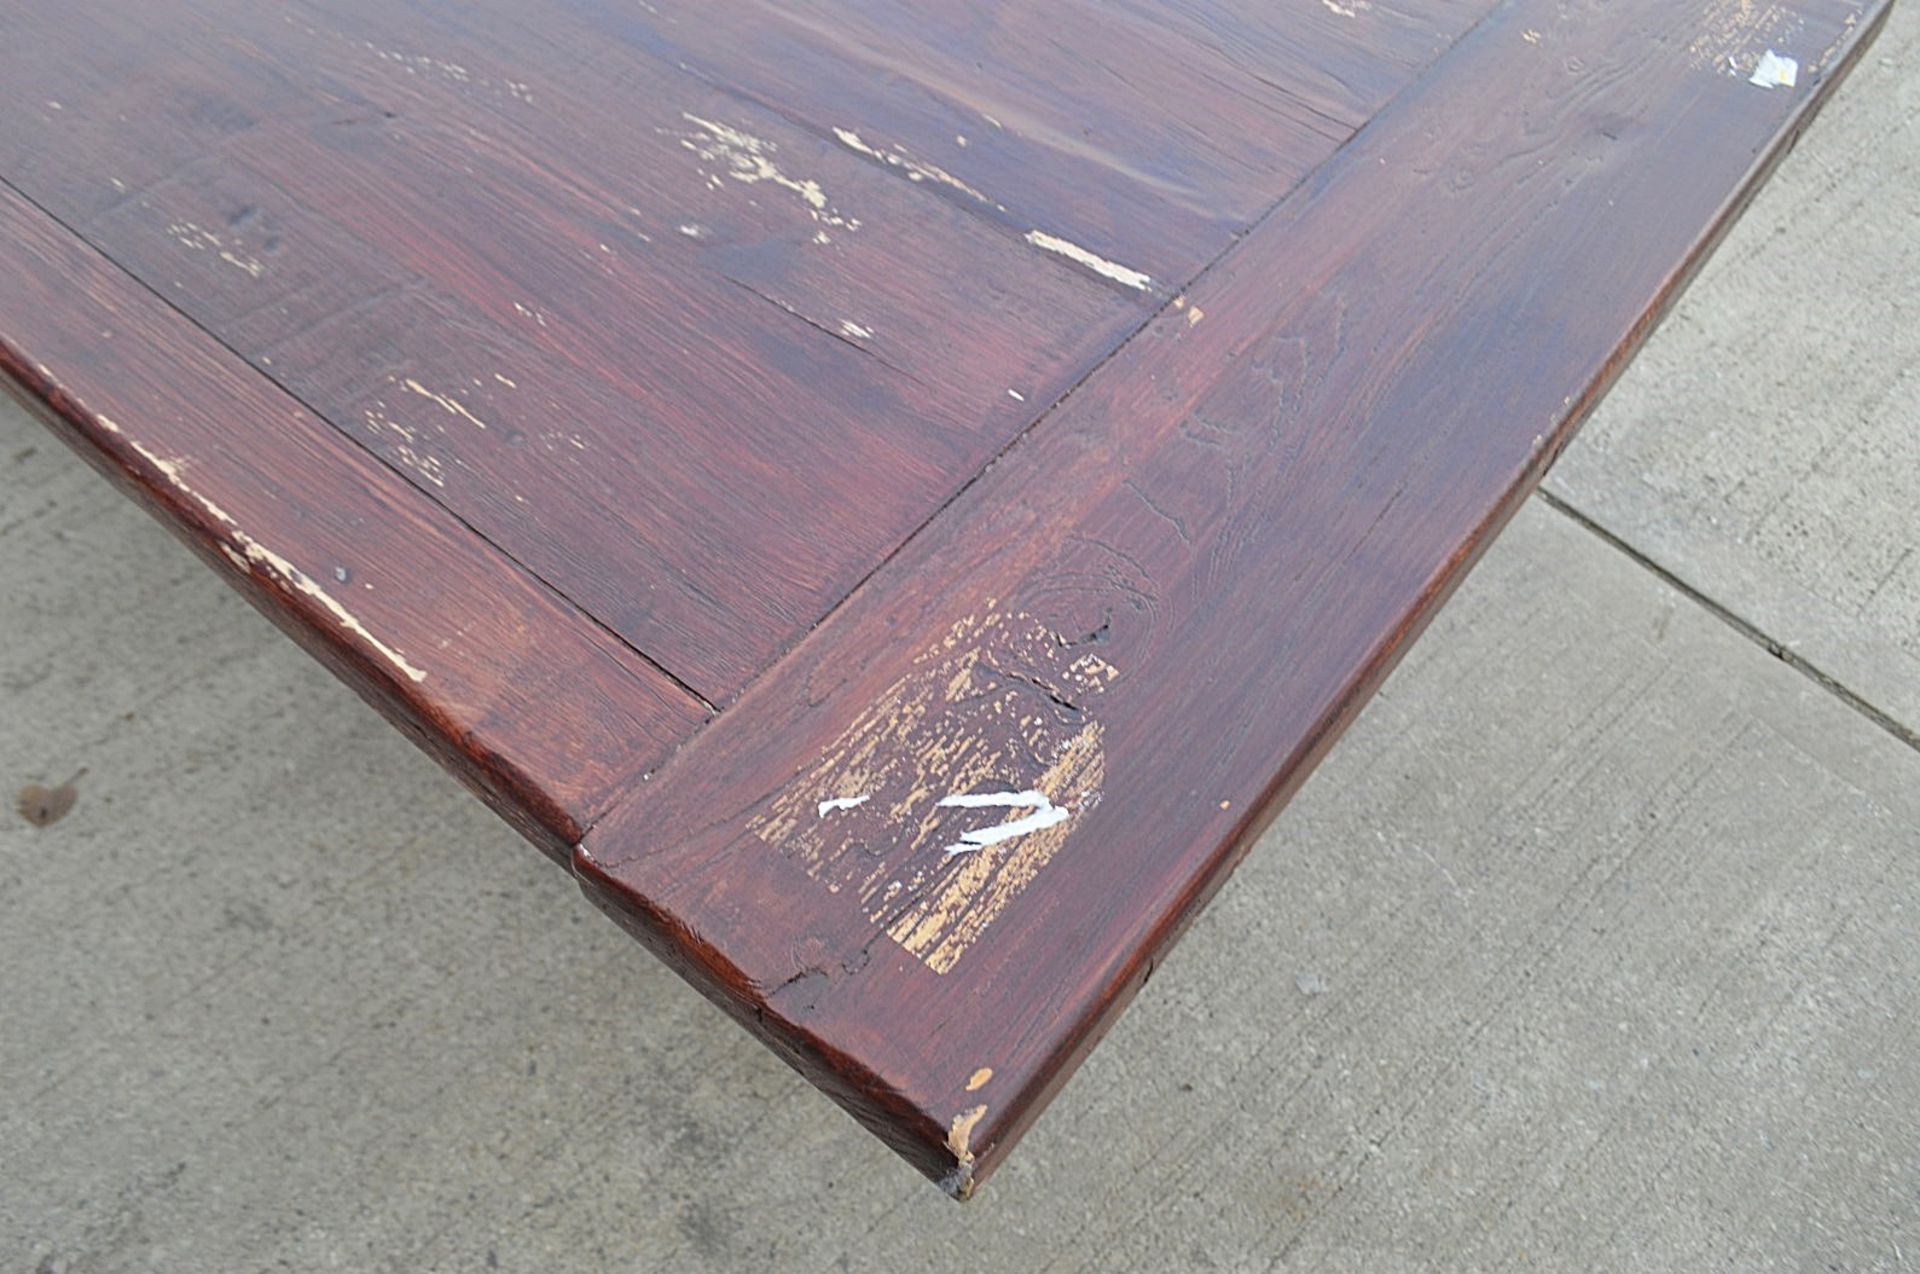 1 x Sturdy 2 Metre Georgian-Style Solid Wood Dining Table In A Dark Stain With A Chromed Base - Image 6 of 6